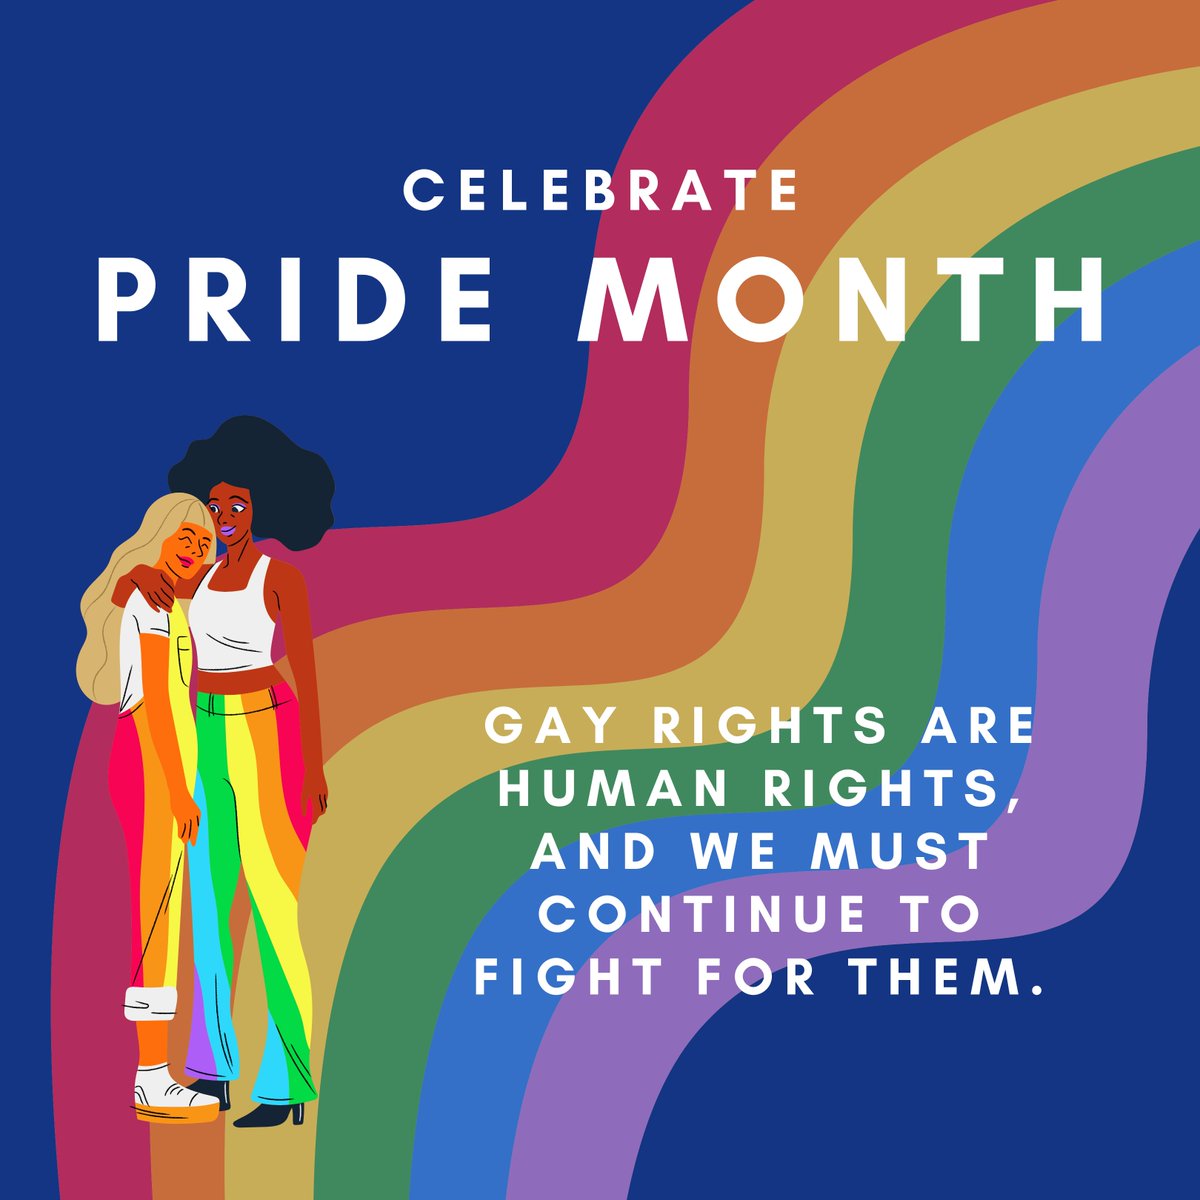 Happy Pride Month! This is a month to celebrate love and the progress we've made towards LGBTQ+ equality, but a reminder to keep fighting as well. I will keep my 100% Voting Record with Equality California perfect, and will always advocate for all forms of equality.